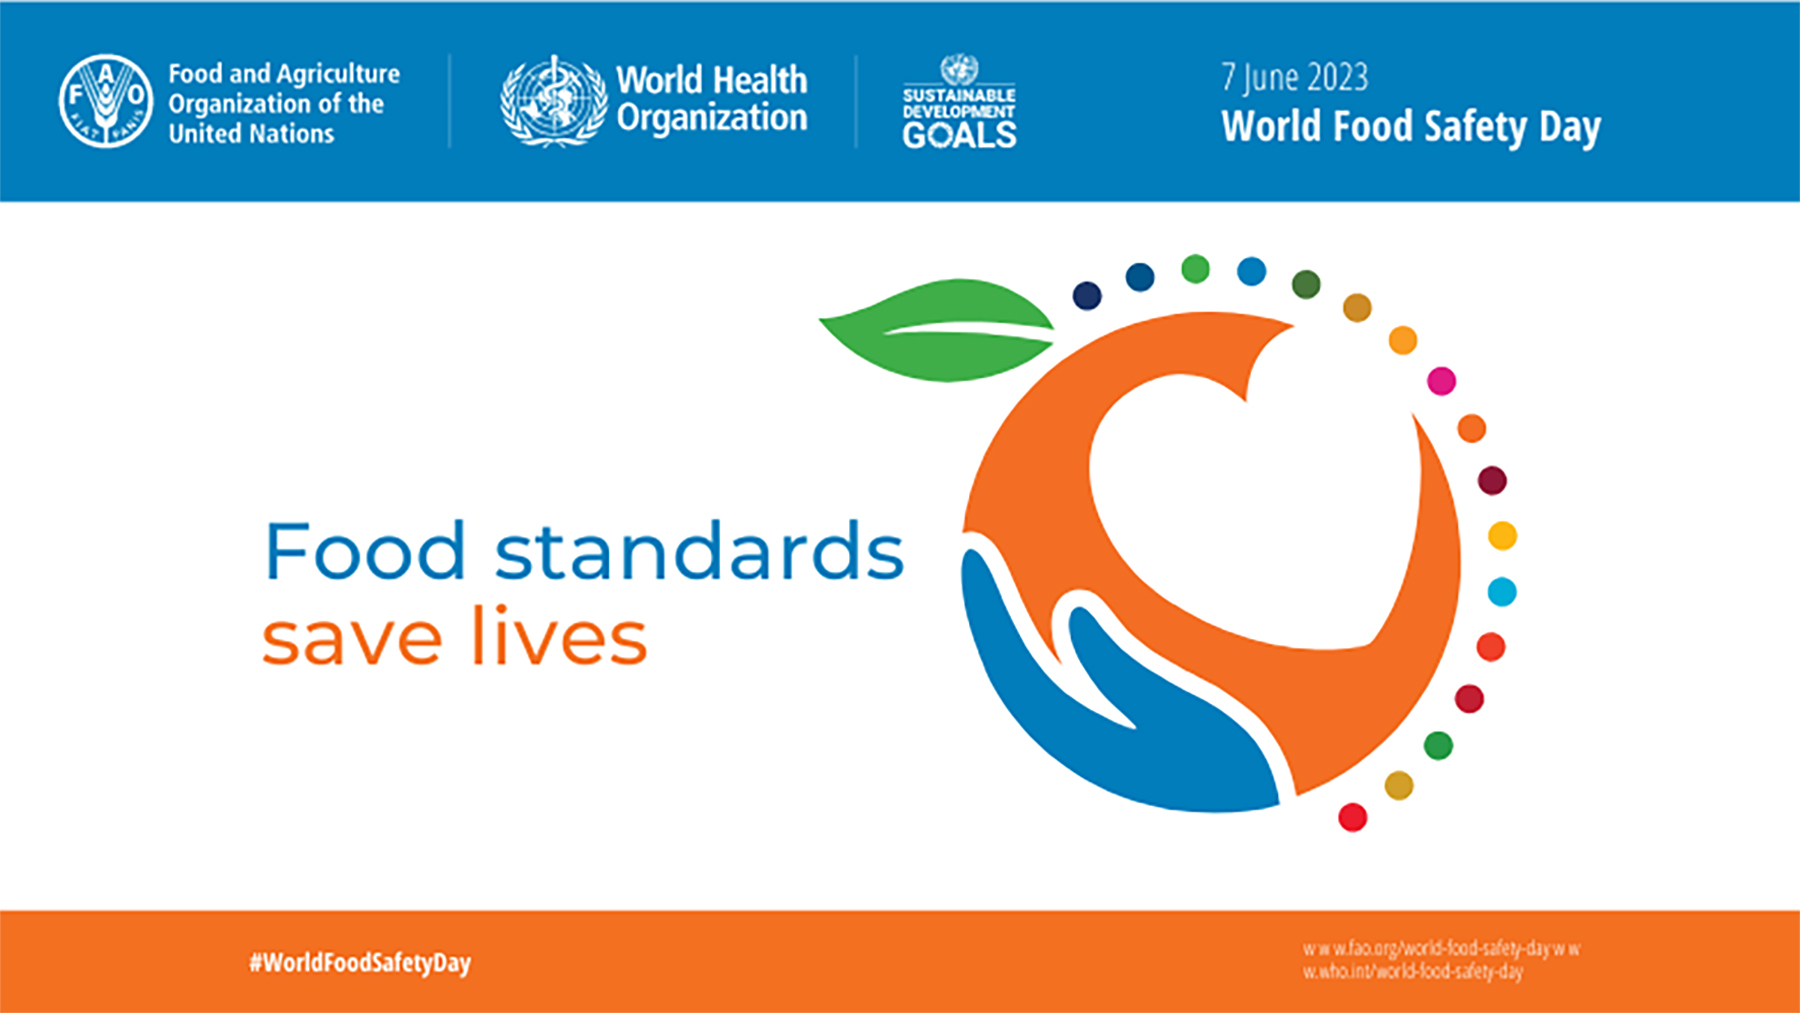 <h3>World Food Safety Day (WFSD) will be celebrated on 7<sup>th</sup> June 2023</h3>